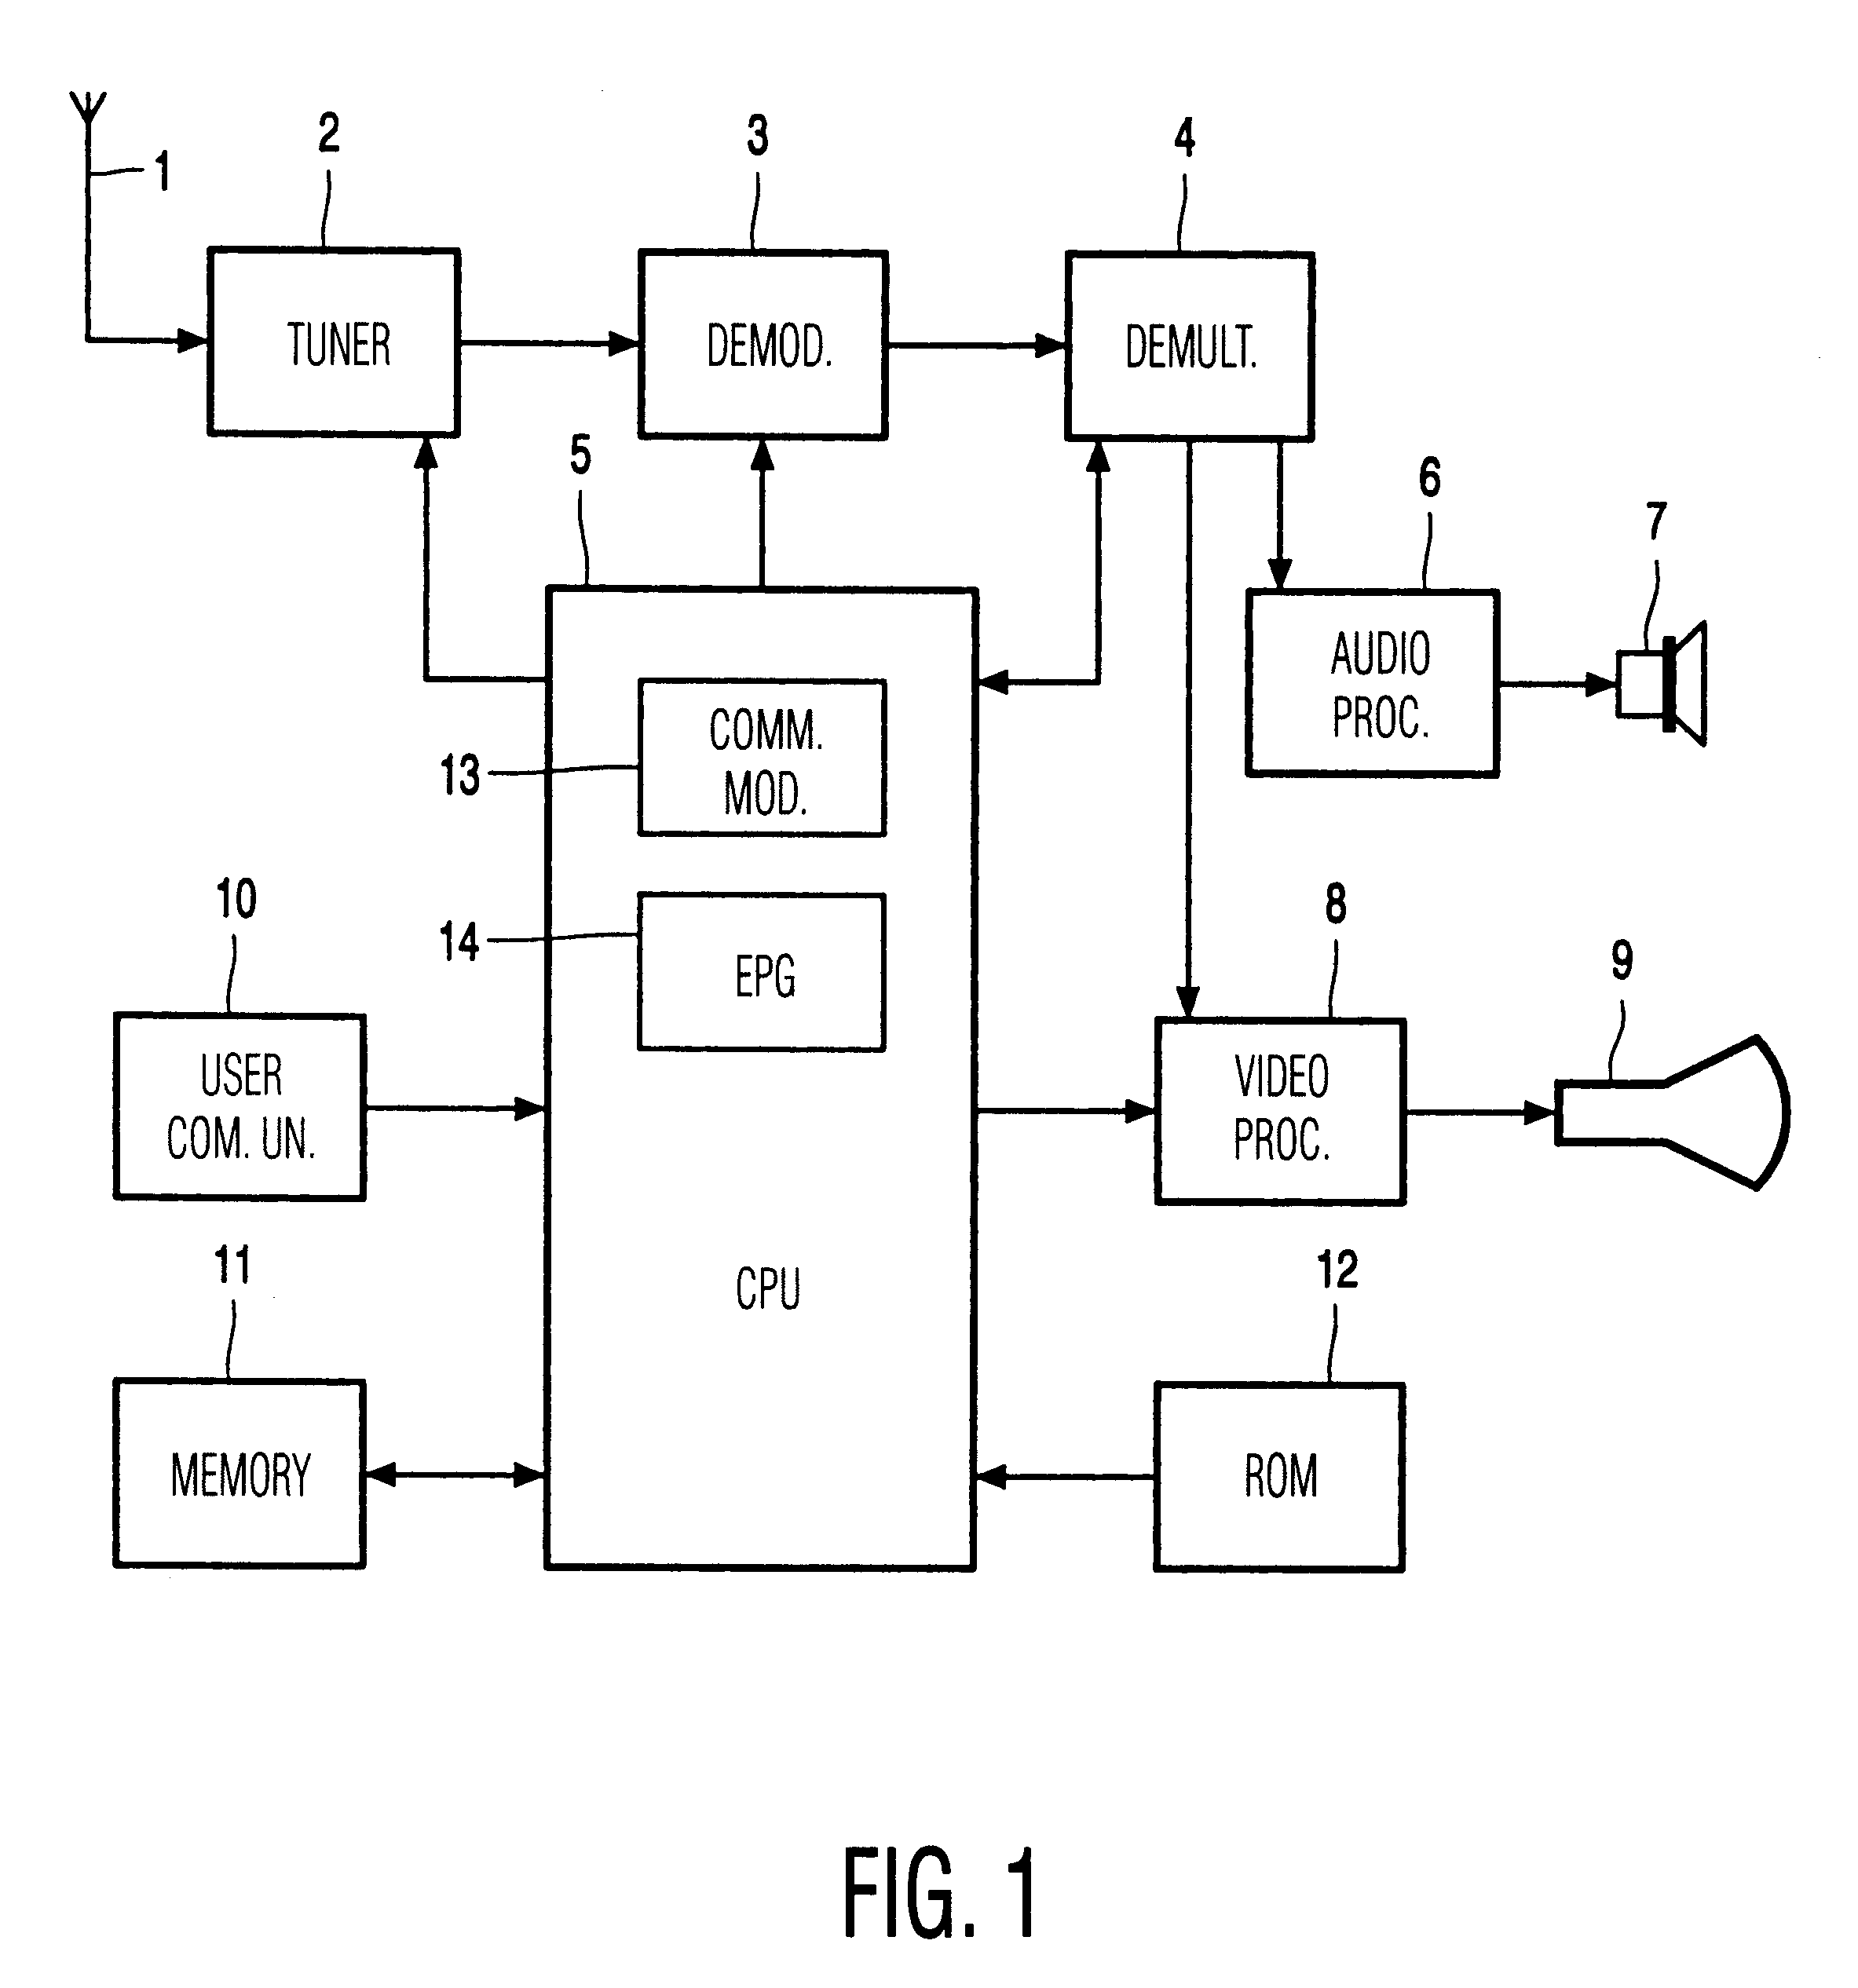 Method and apparatus for displaying an electronic program guide